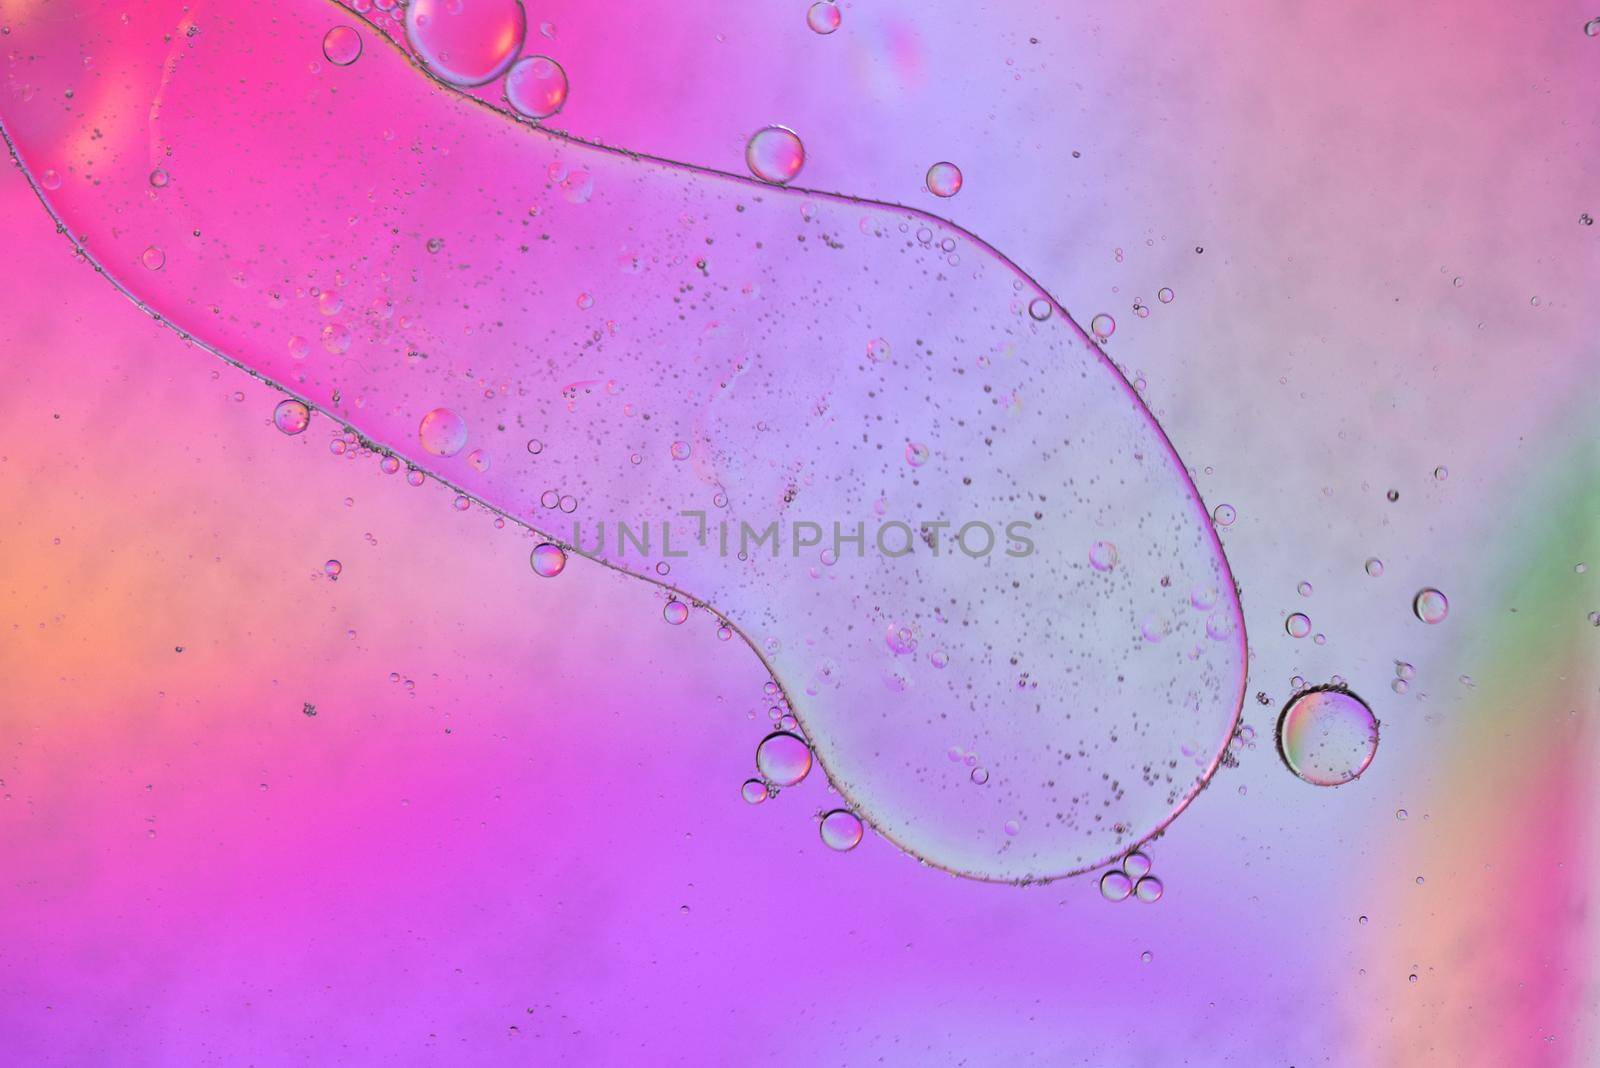 Oil drops in water. Defocused abstract psychedelic pattern image pink colored. Abstract background with colorful gradient colors. DOF.